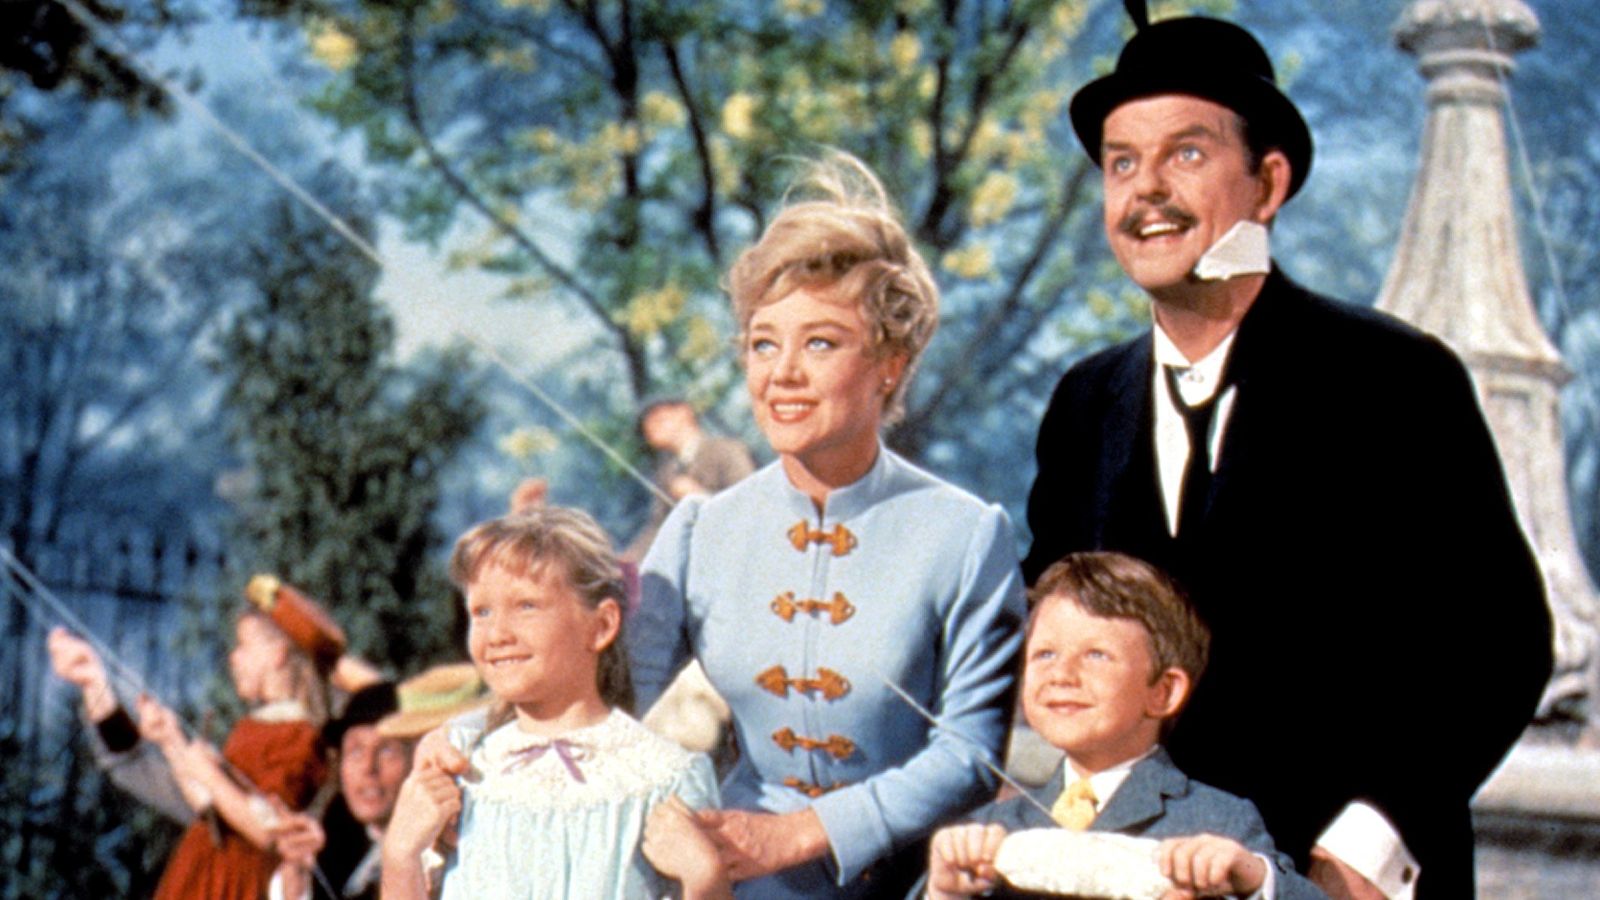 Glynis Johns, best known for starring as Mrs Banks in Mary Poppins, has died